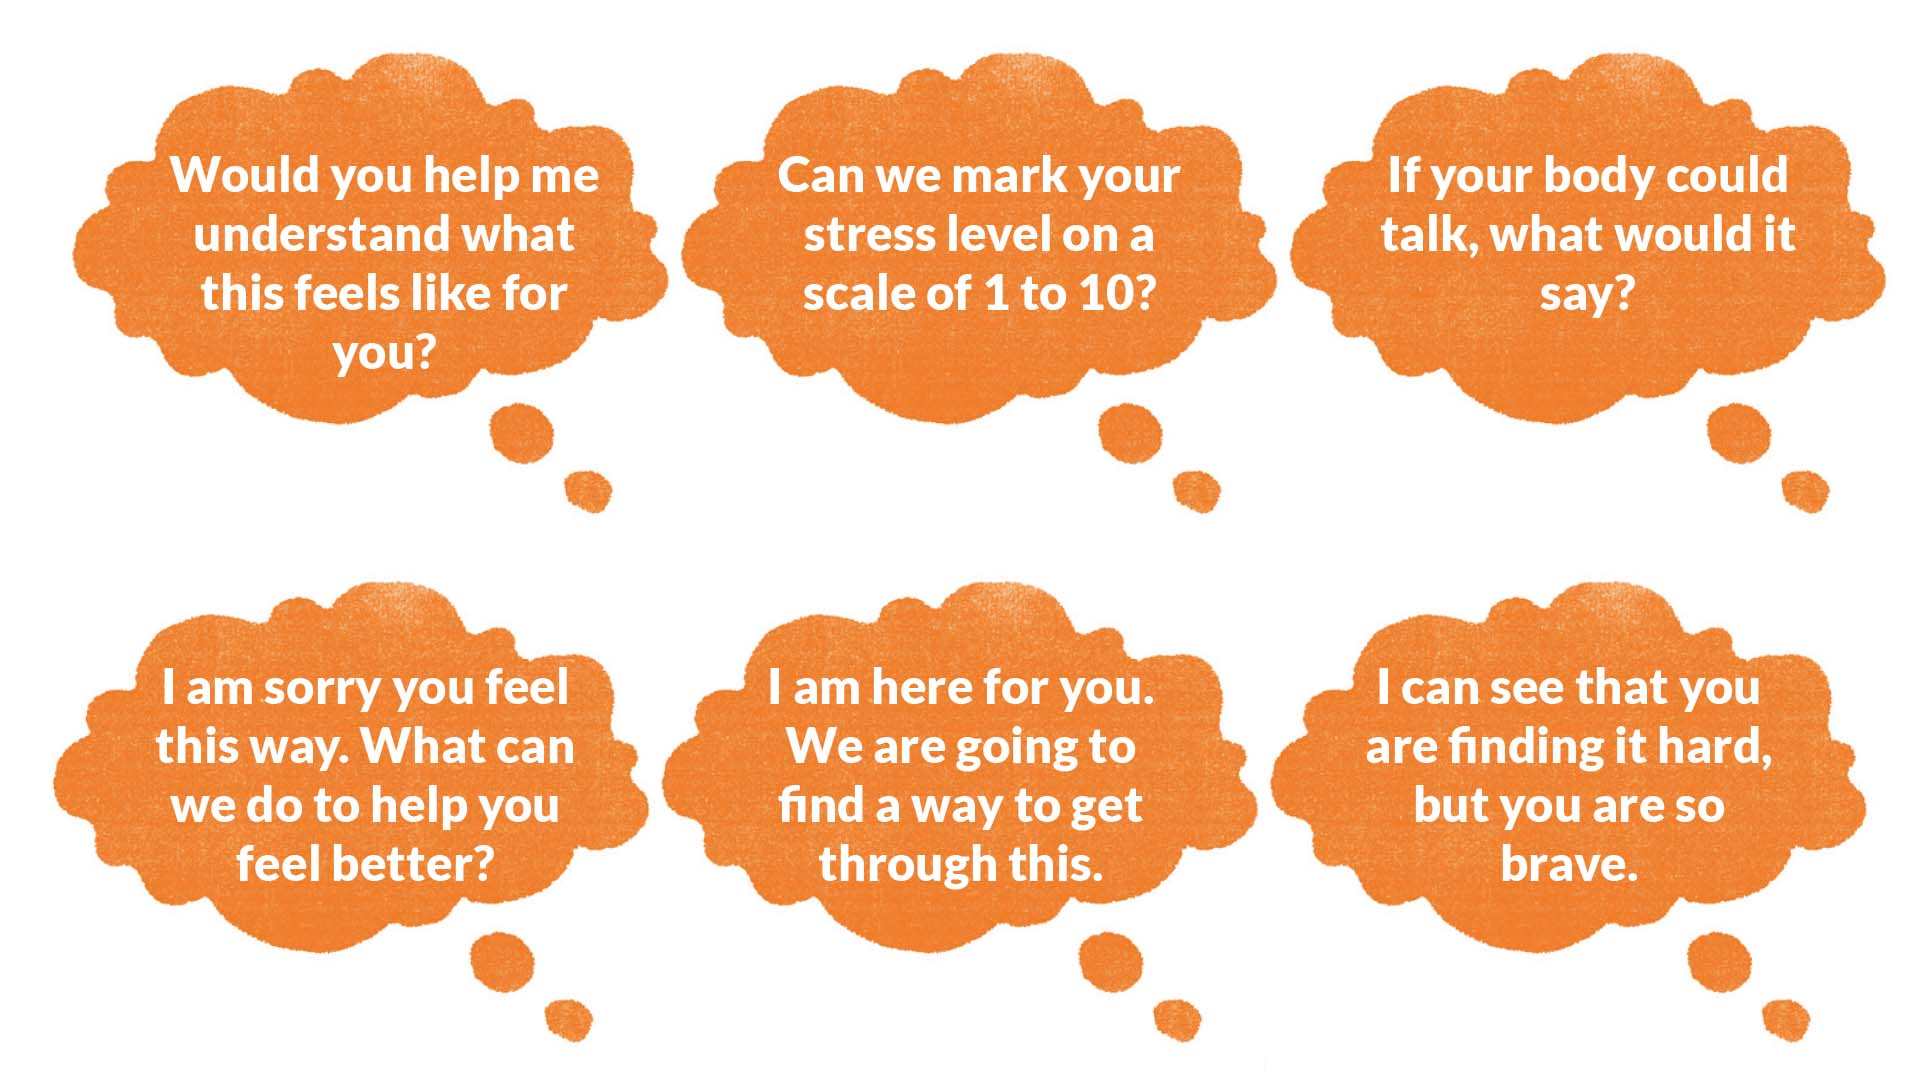 Six orange thought clouds are on the page and have question and tips for talking to pupils when they are stressed.